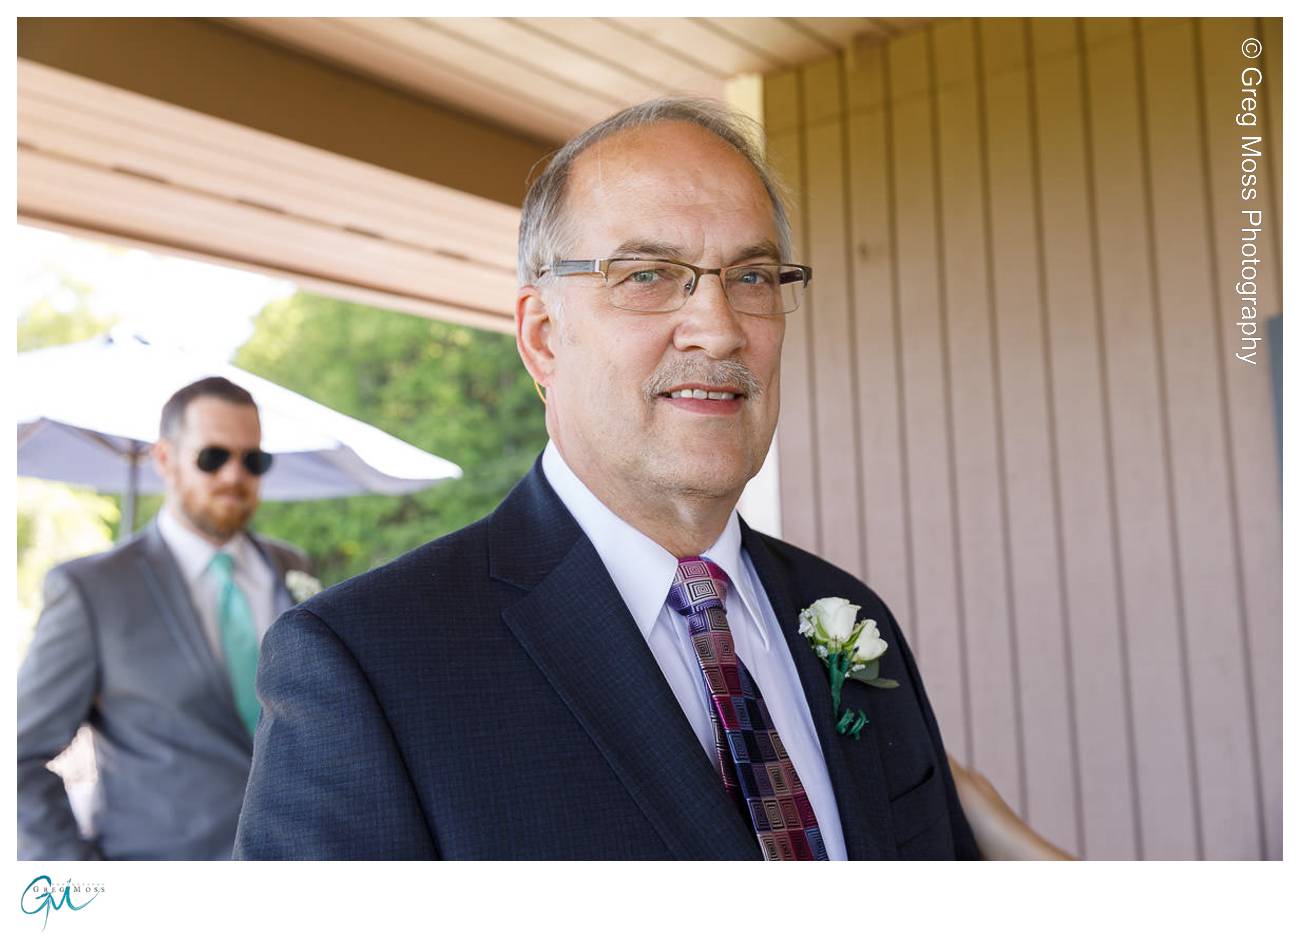 Father of the bride with boutonniere